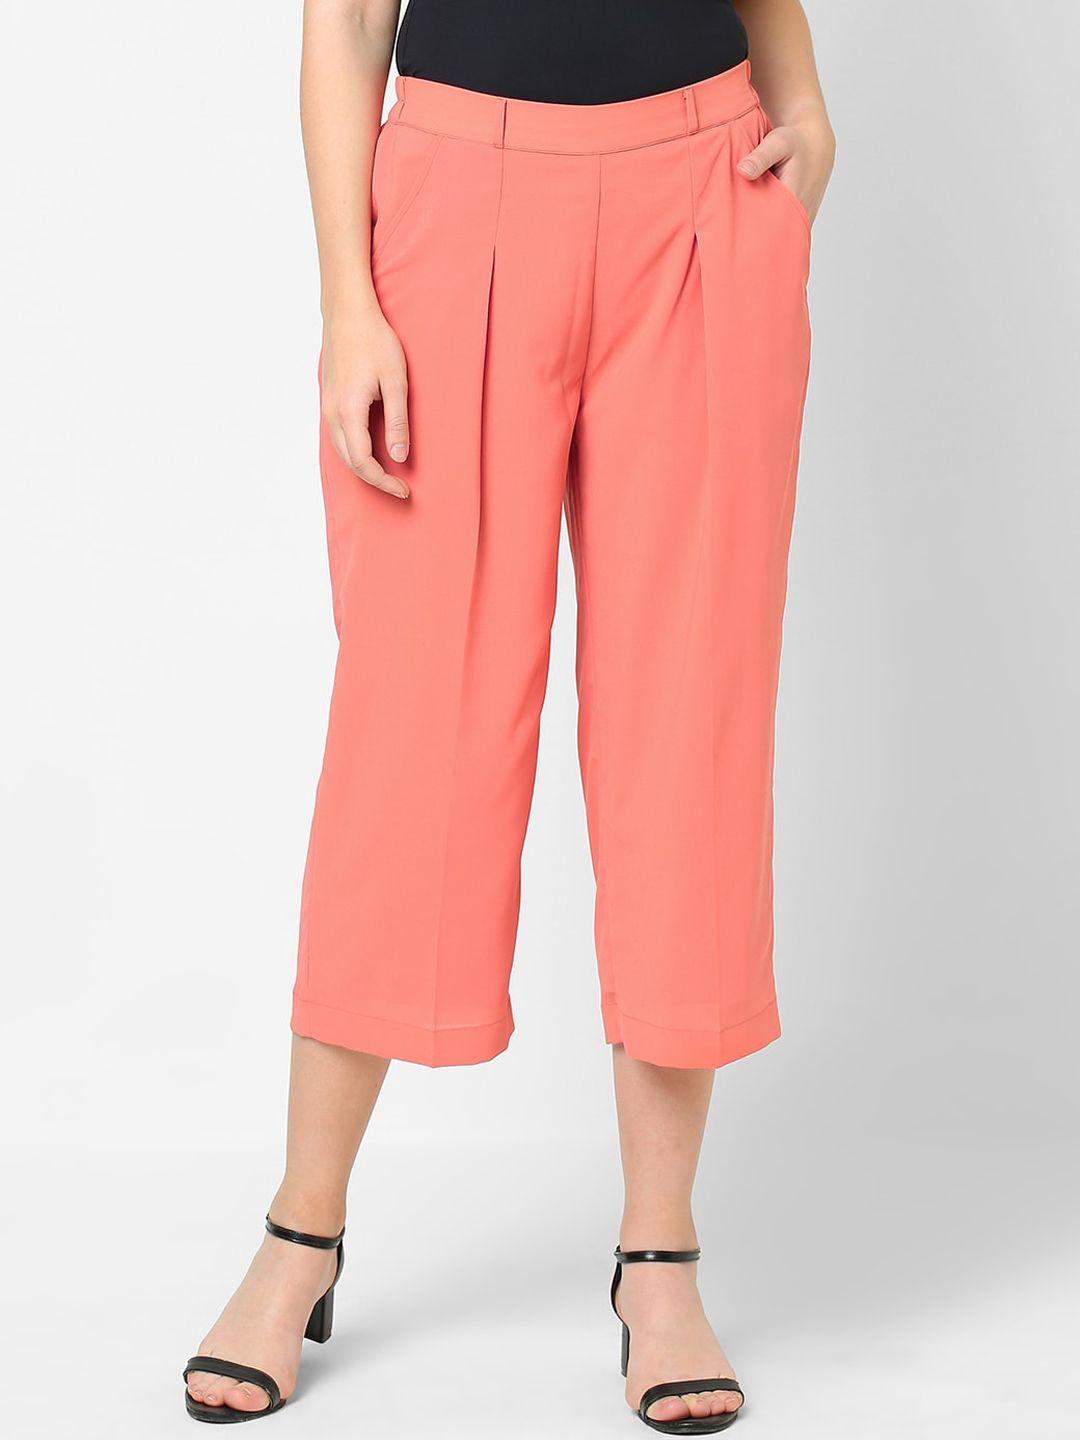 mish-women-peach-coloured-solid-comfort-loose-fit-easy-wash-pleated-culottes-trousers